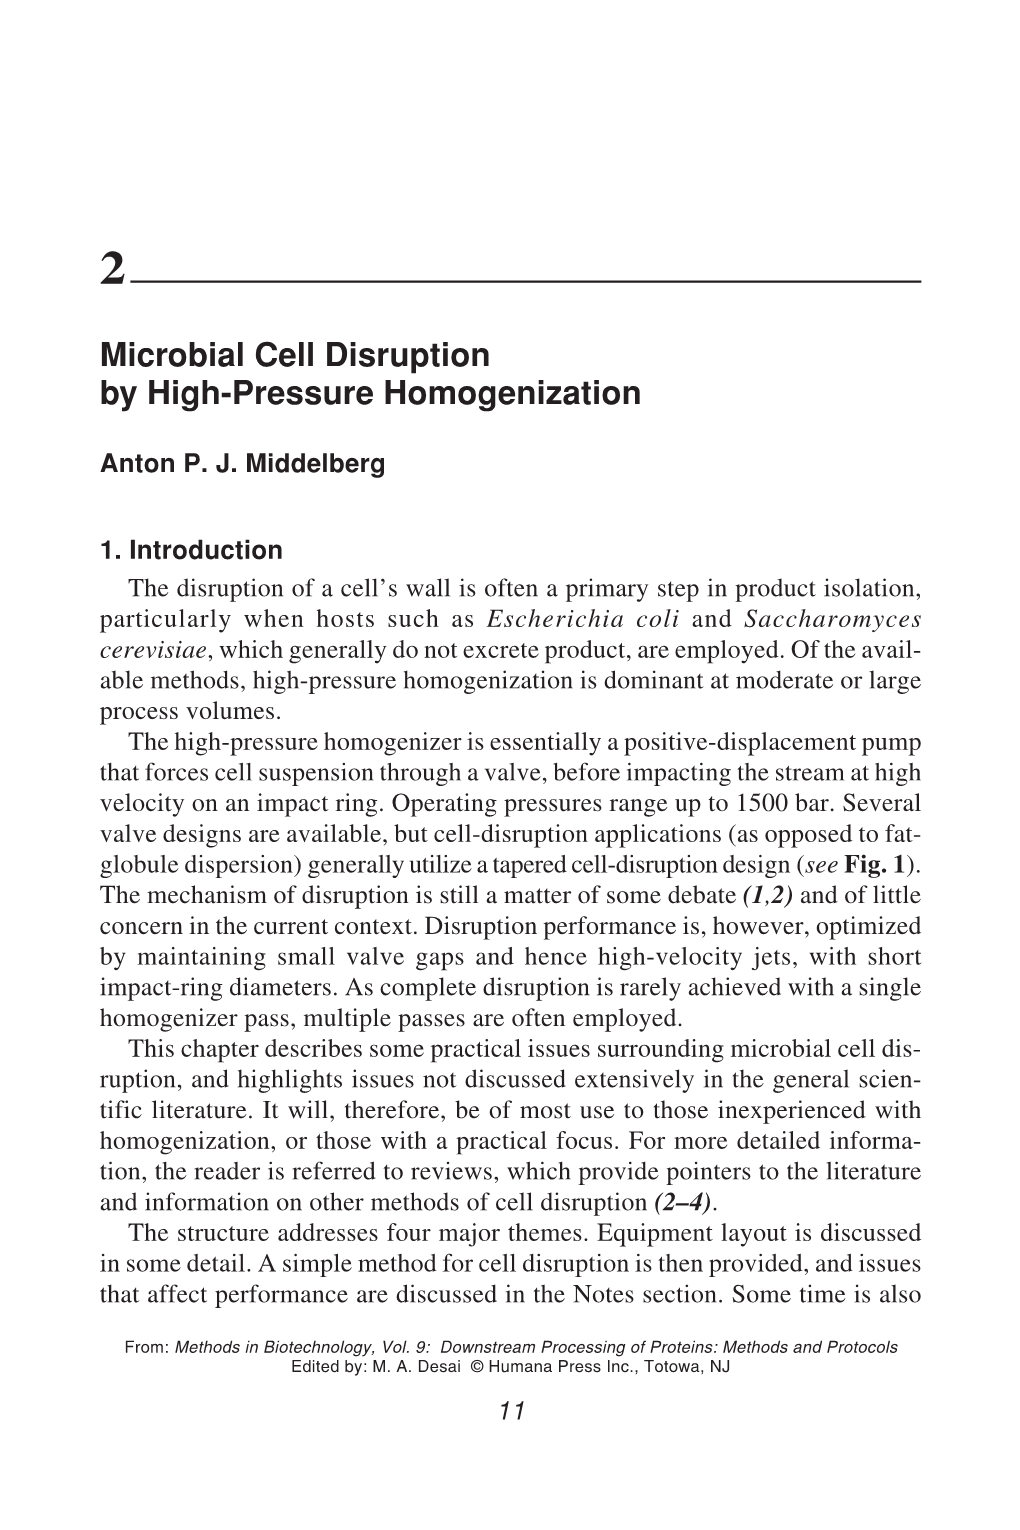 Microbial Cell Disruption by High-Pressure Homogenization